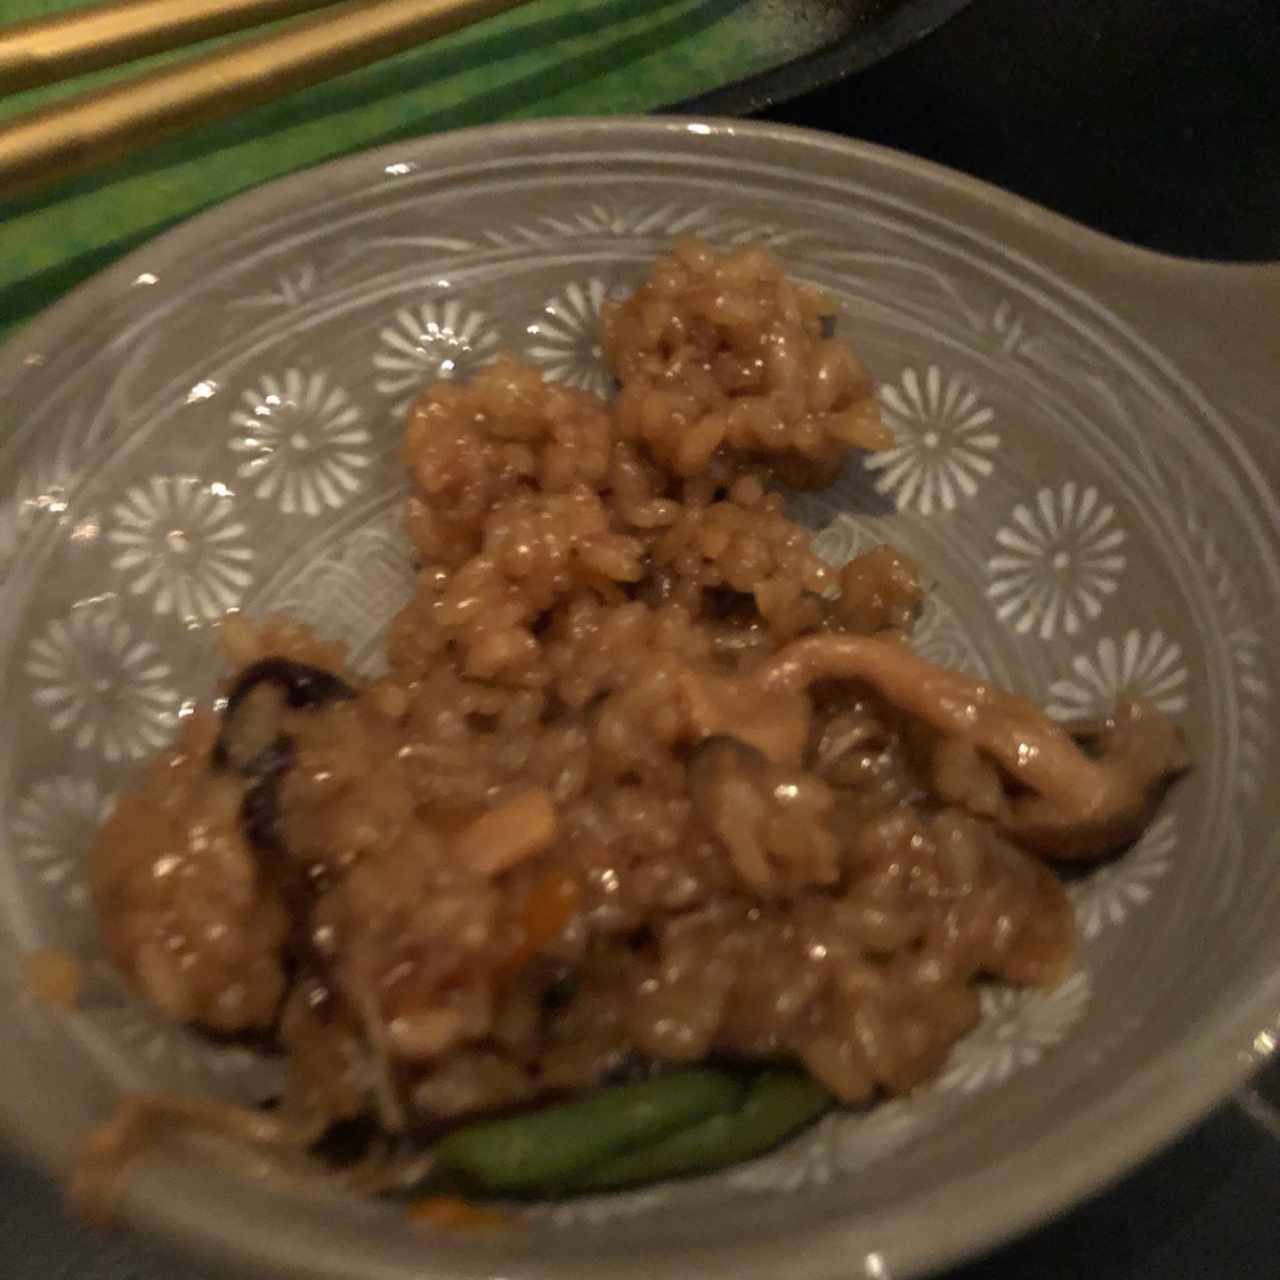 JAPANESE RISOTTO